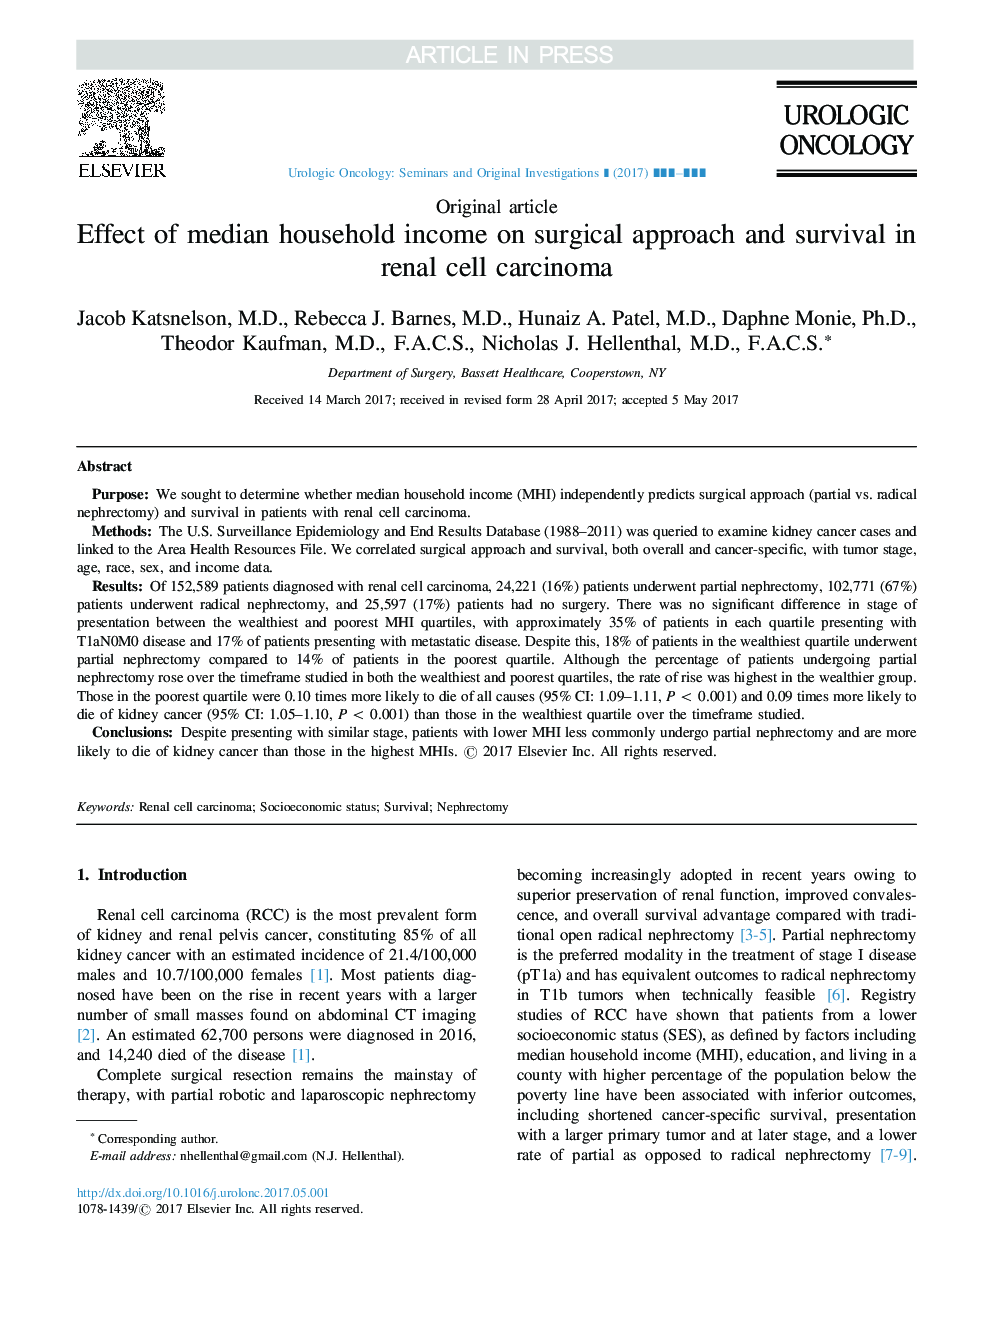 Effect of median household income on surgical approach and survival in renal cell carcinoma